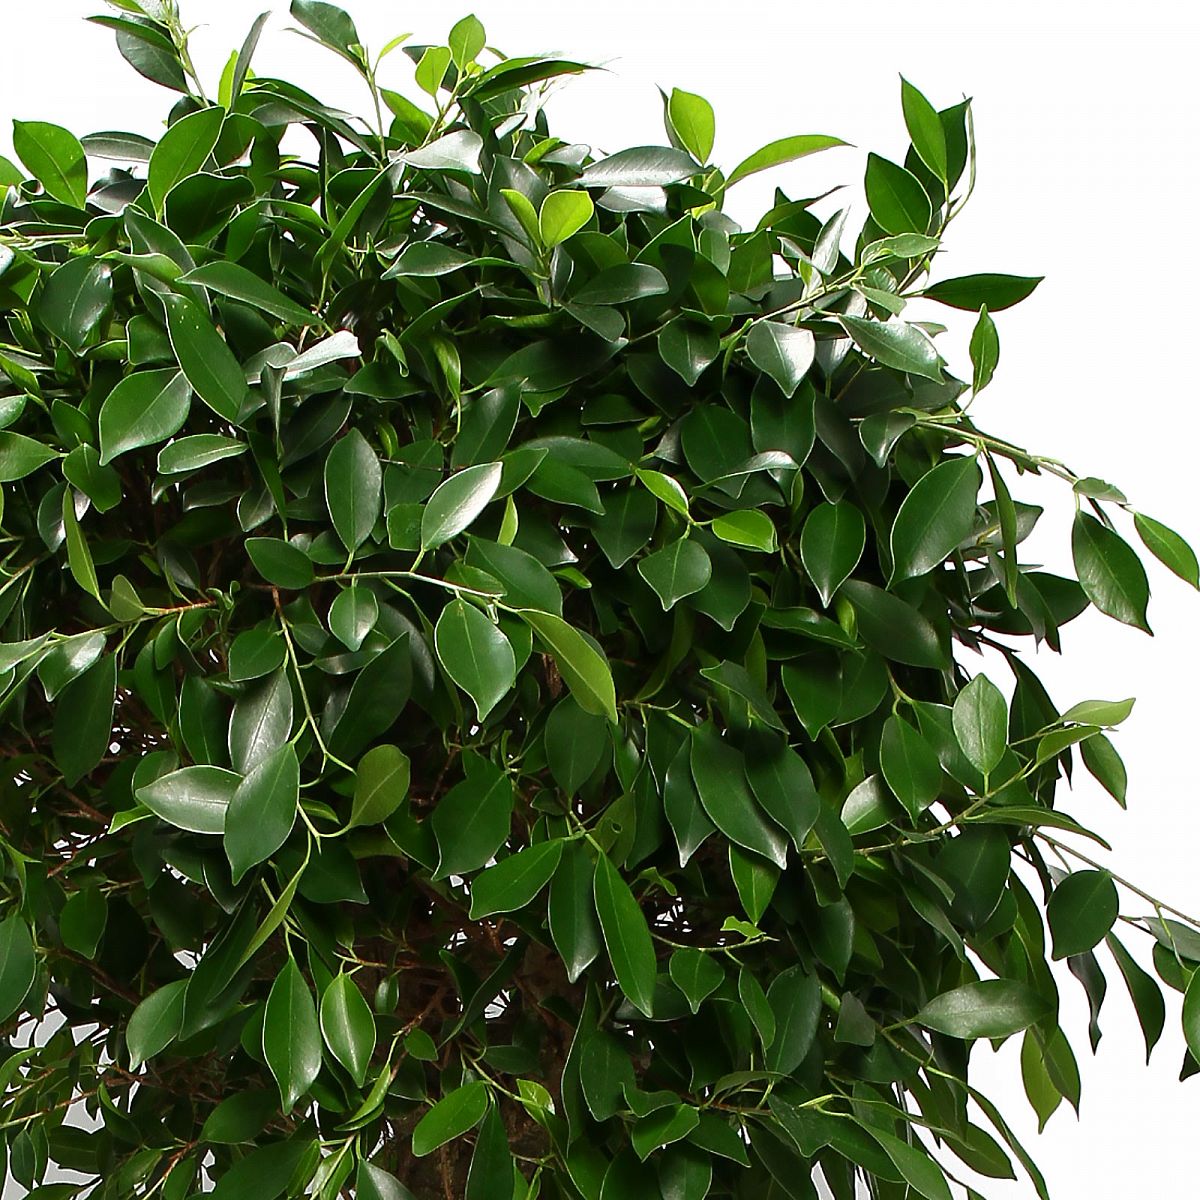 Lush Weeping Fig Ficus microcarpa ‘Nitida’ Tall Indoor House Plants Trees